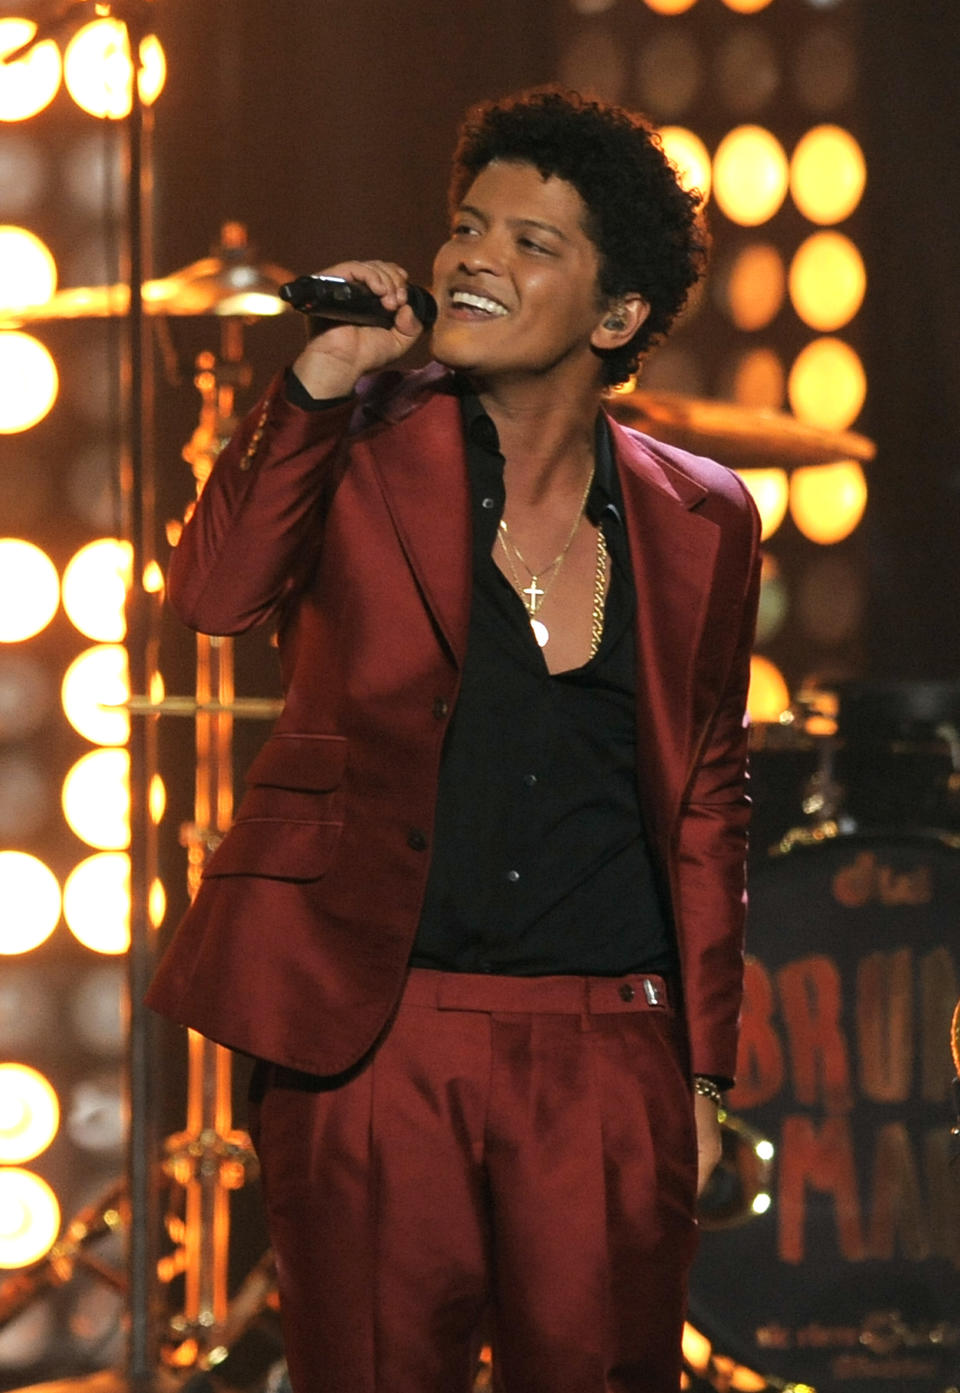 FILE - In this May 19, 2013 file photo, Bruno Mars performs at the Billboard Music Awards in Las Vegas. Mars' "Treasure," is one of the top songs of the summer. (Photo by Chris Pizzello/Invision/AP, File)